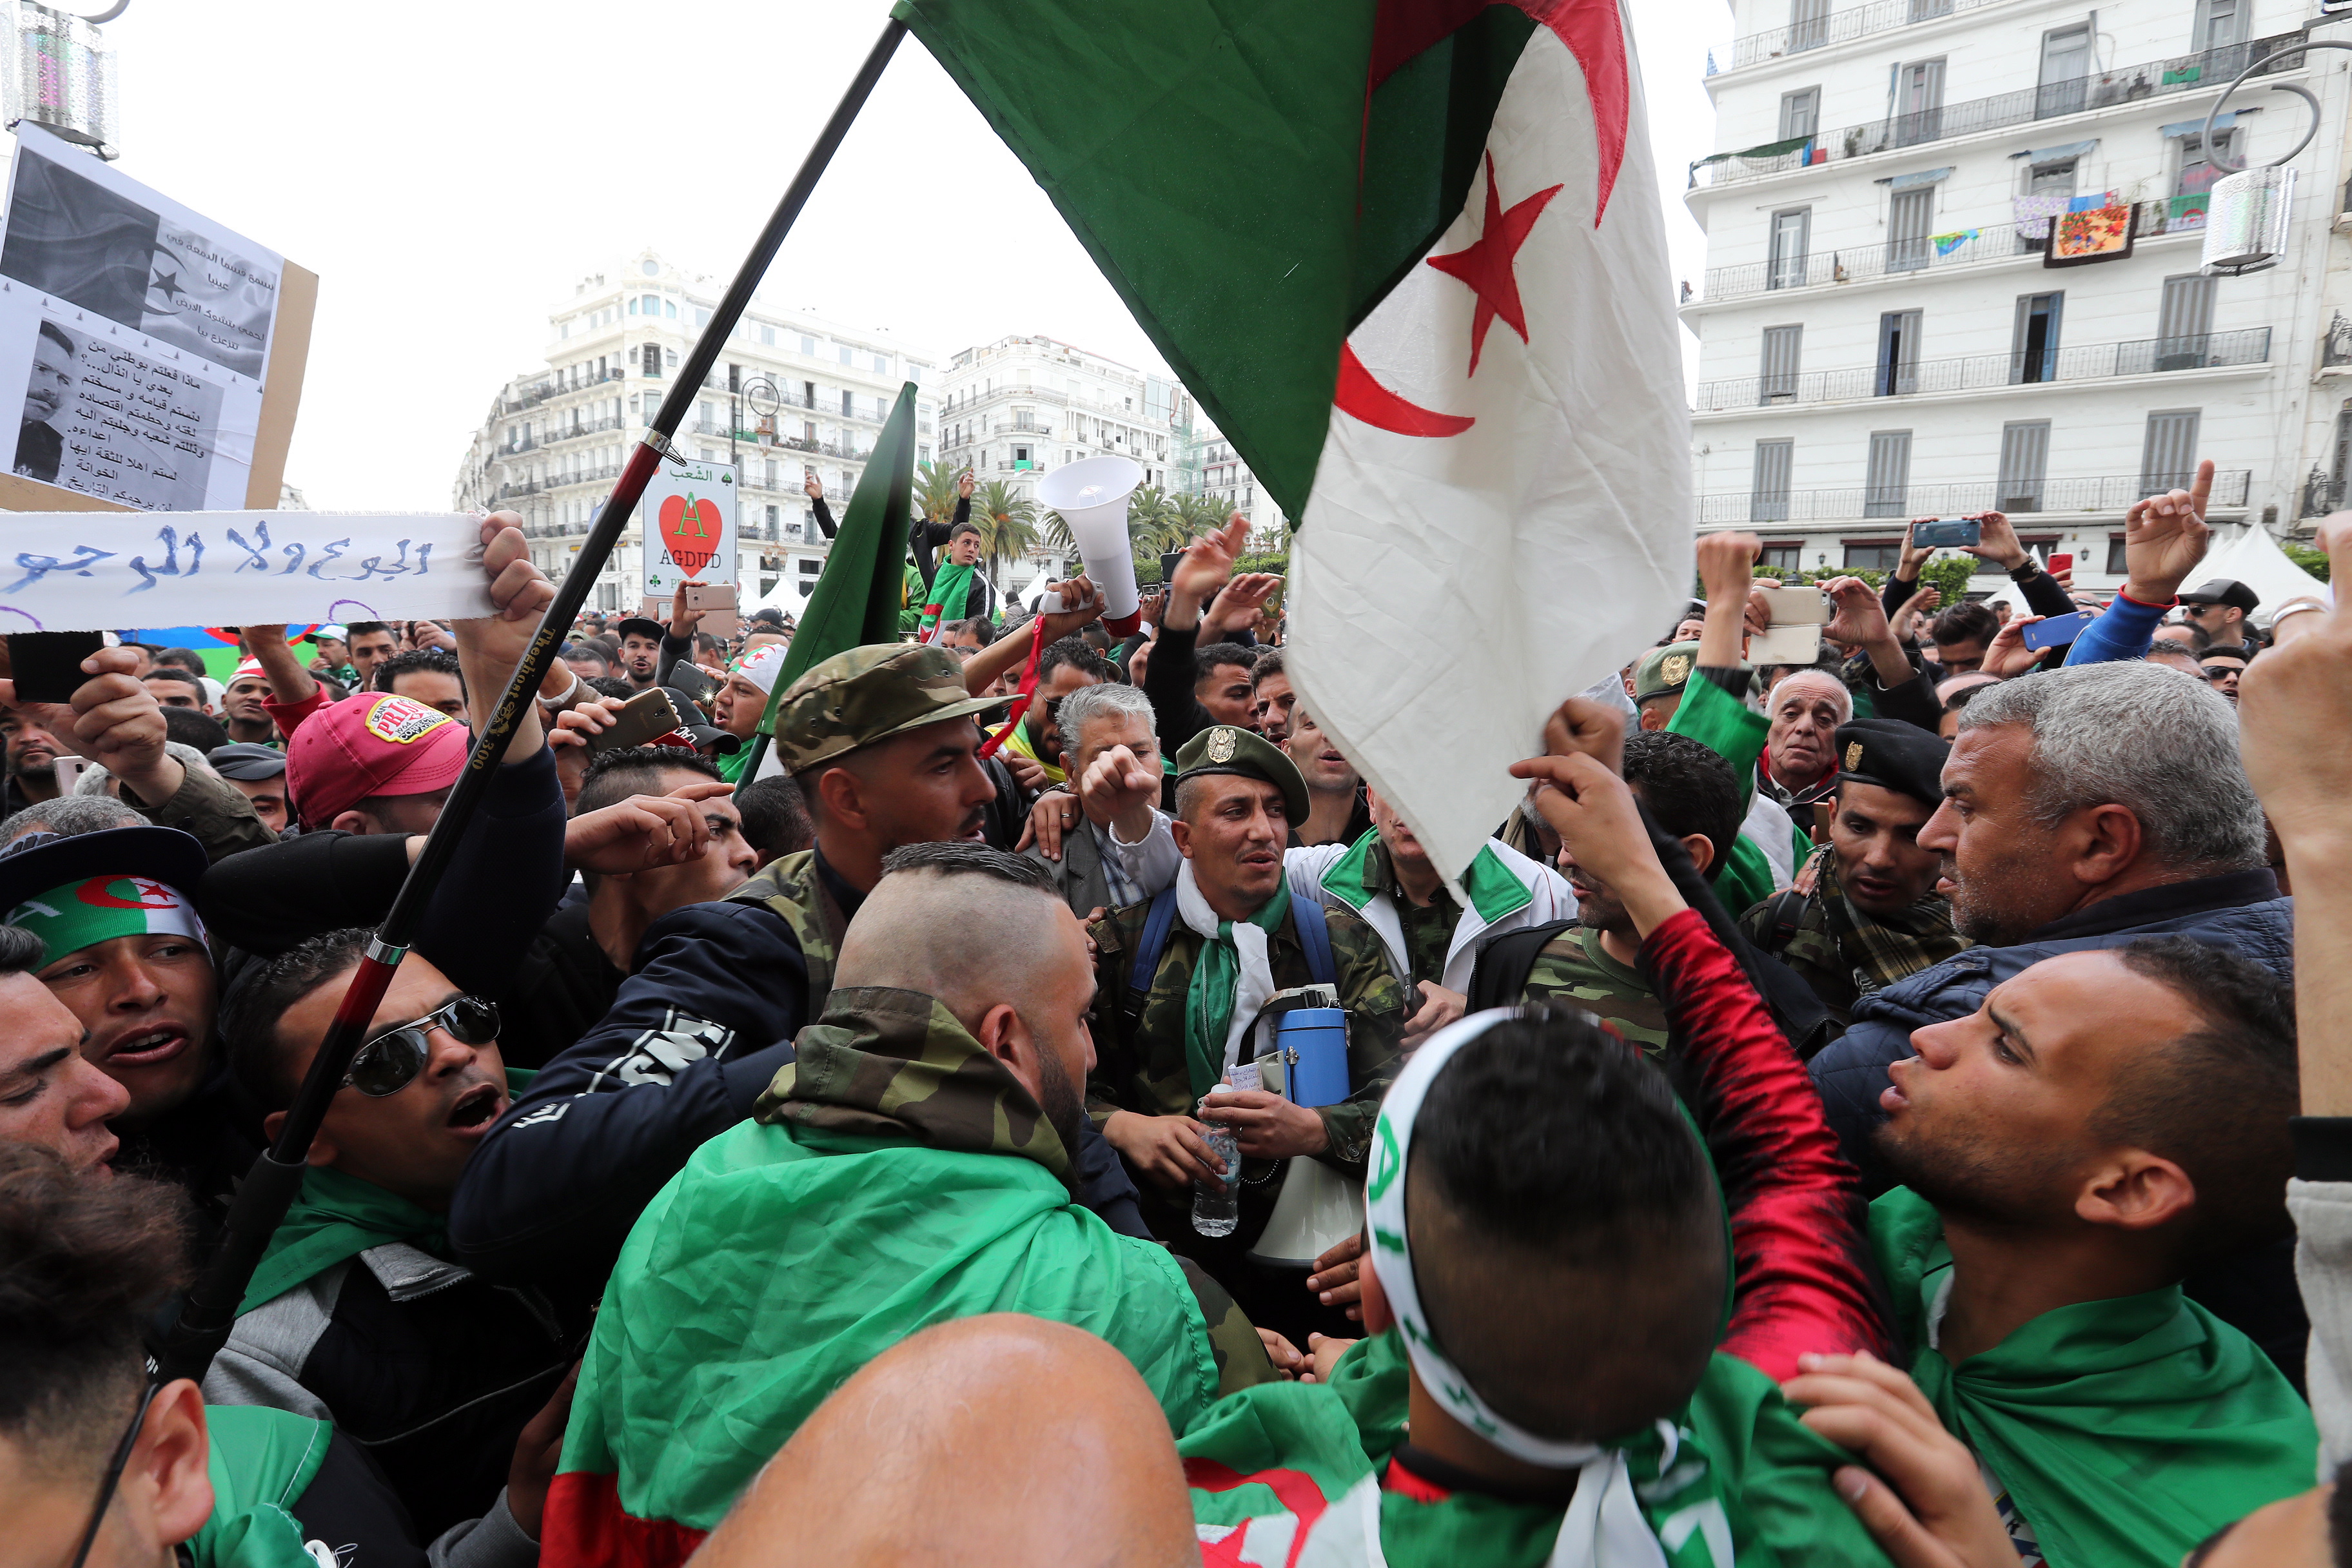 epa07515388 Algerian protesters shout slogans during a demonstration demanding for the departure of the entire Algerian regime, in Algiers, Algeria, 19 April 2019. The Algerians protests that began in early February 2019, after former president Abdelaziz Bouteflika announced his candidacy for a fifth presidential term, continue to call for radical change of the system.  EPA/MOHAMED MESSARA